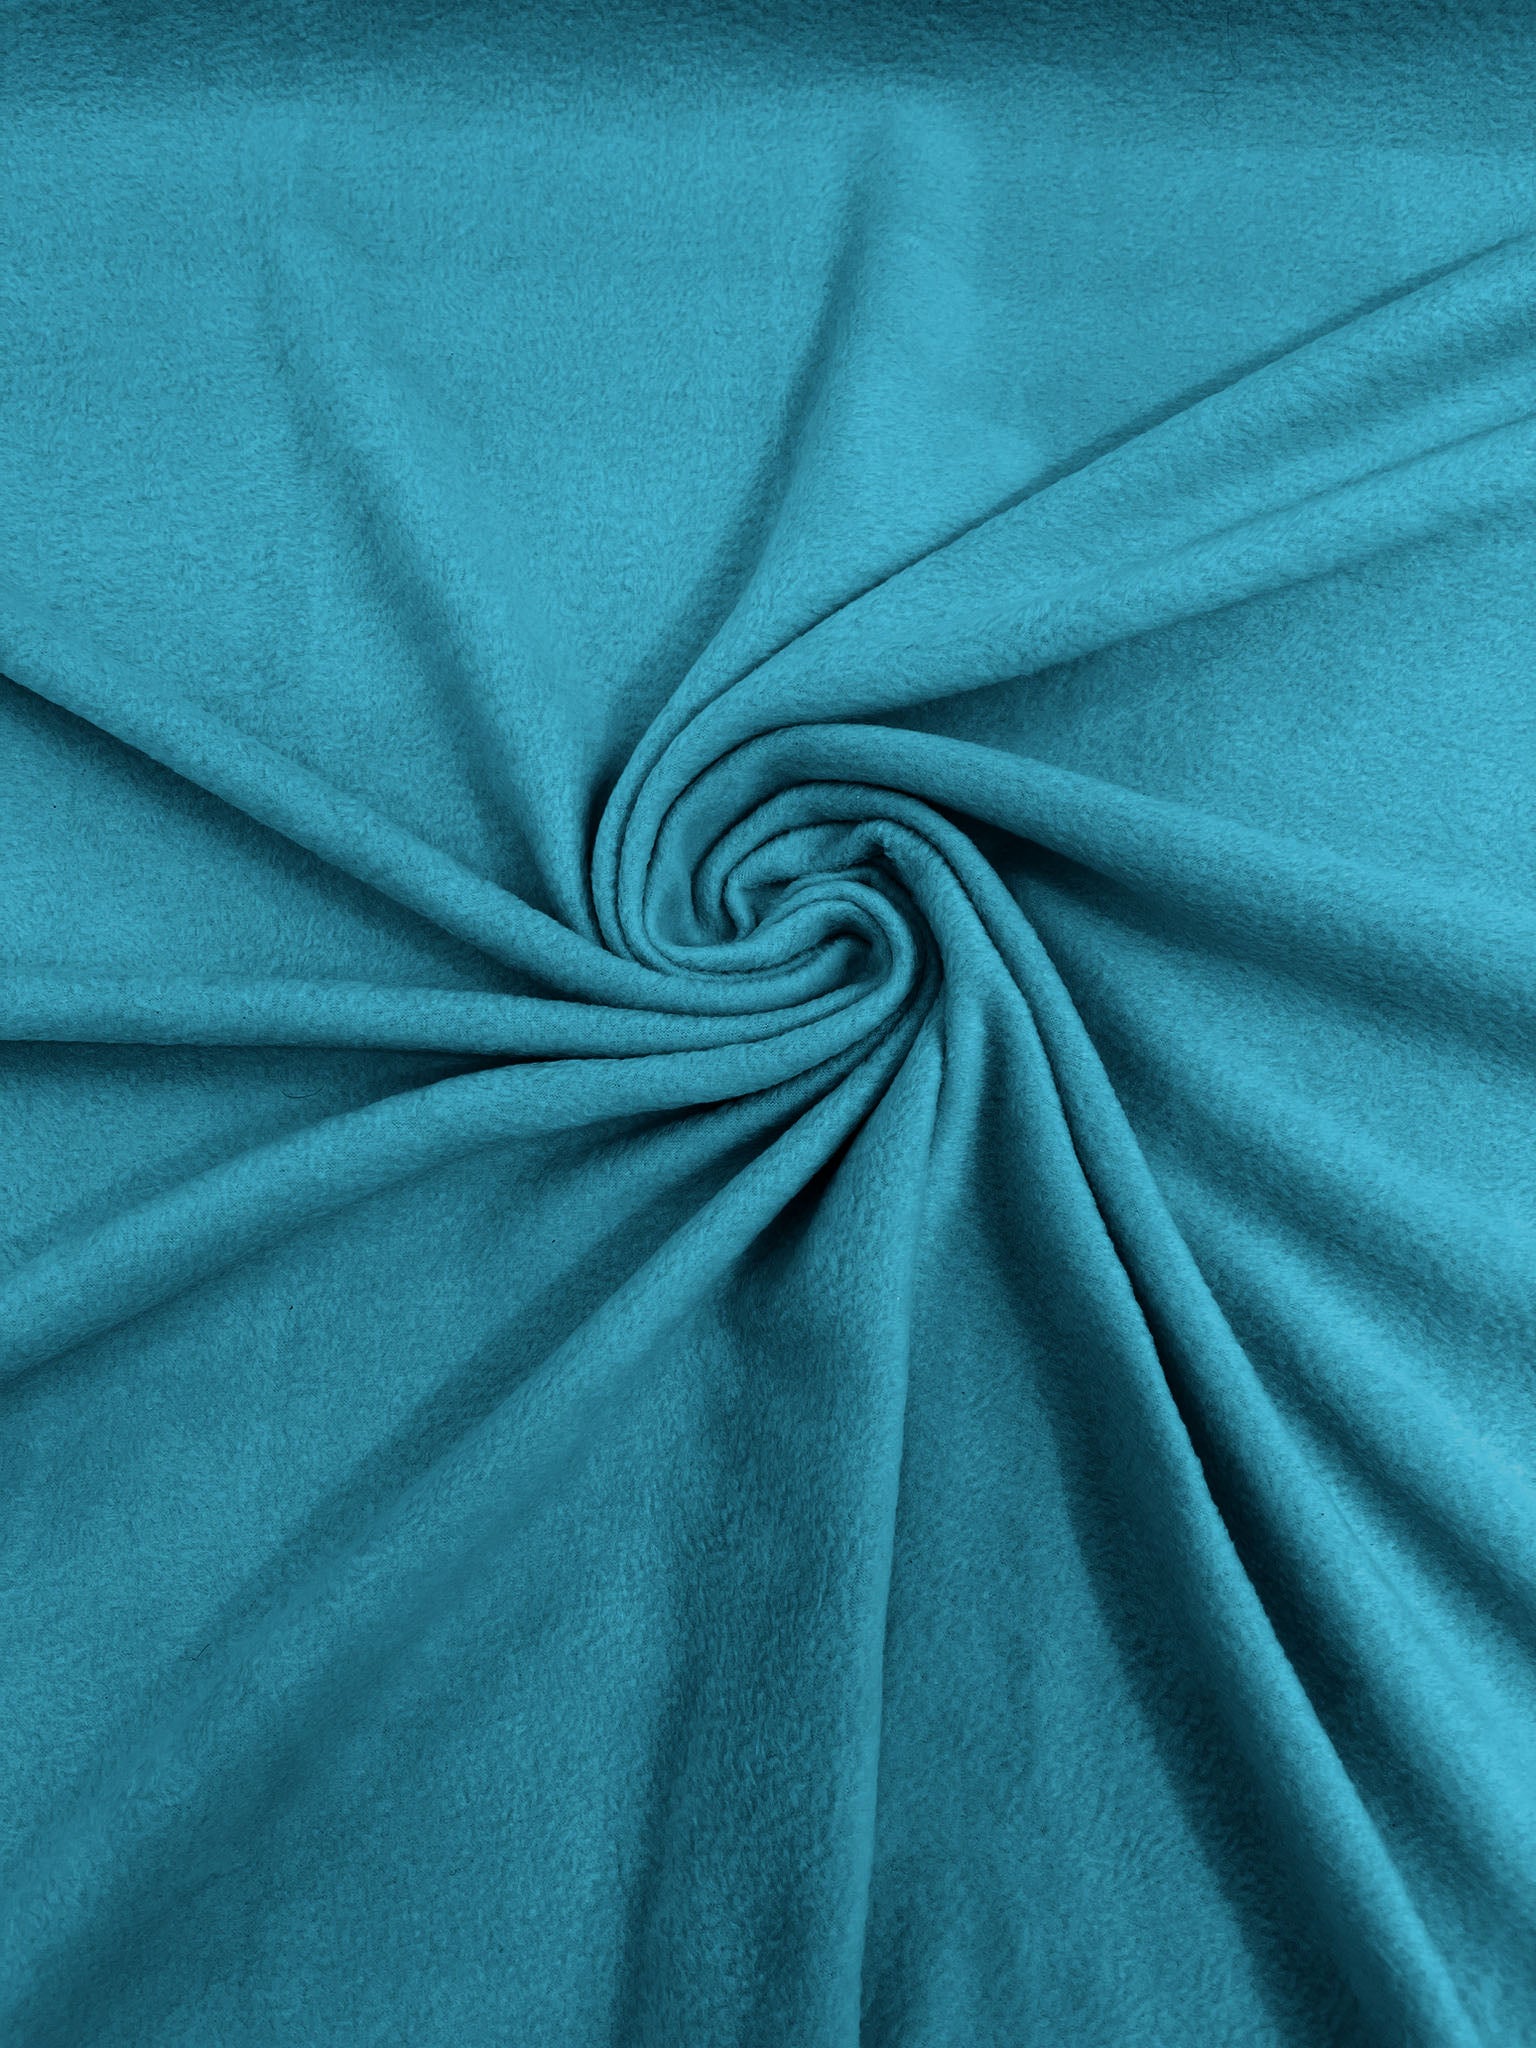 Turquoise Solid Polar Fleece Fabric Anti-Pill 58" Wide Sold by The Yard